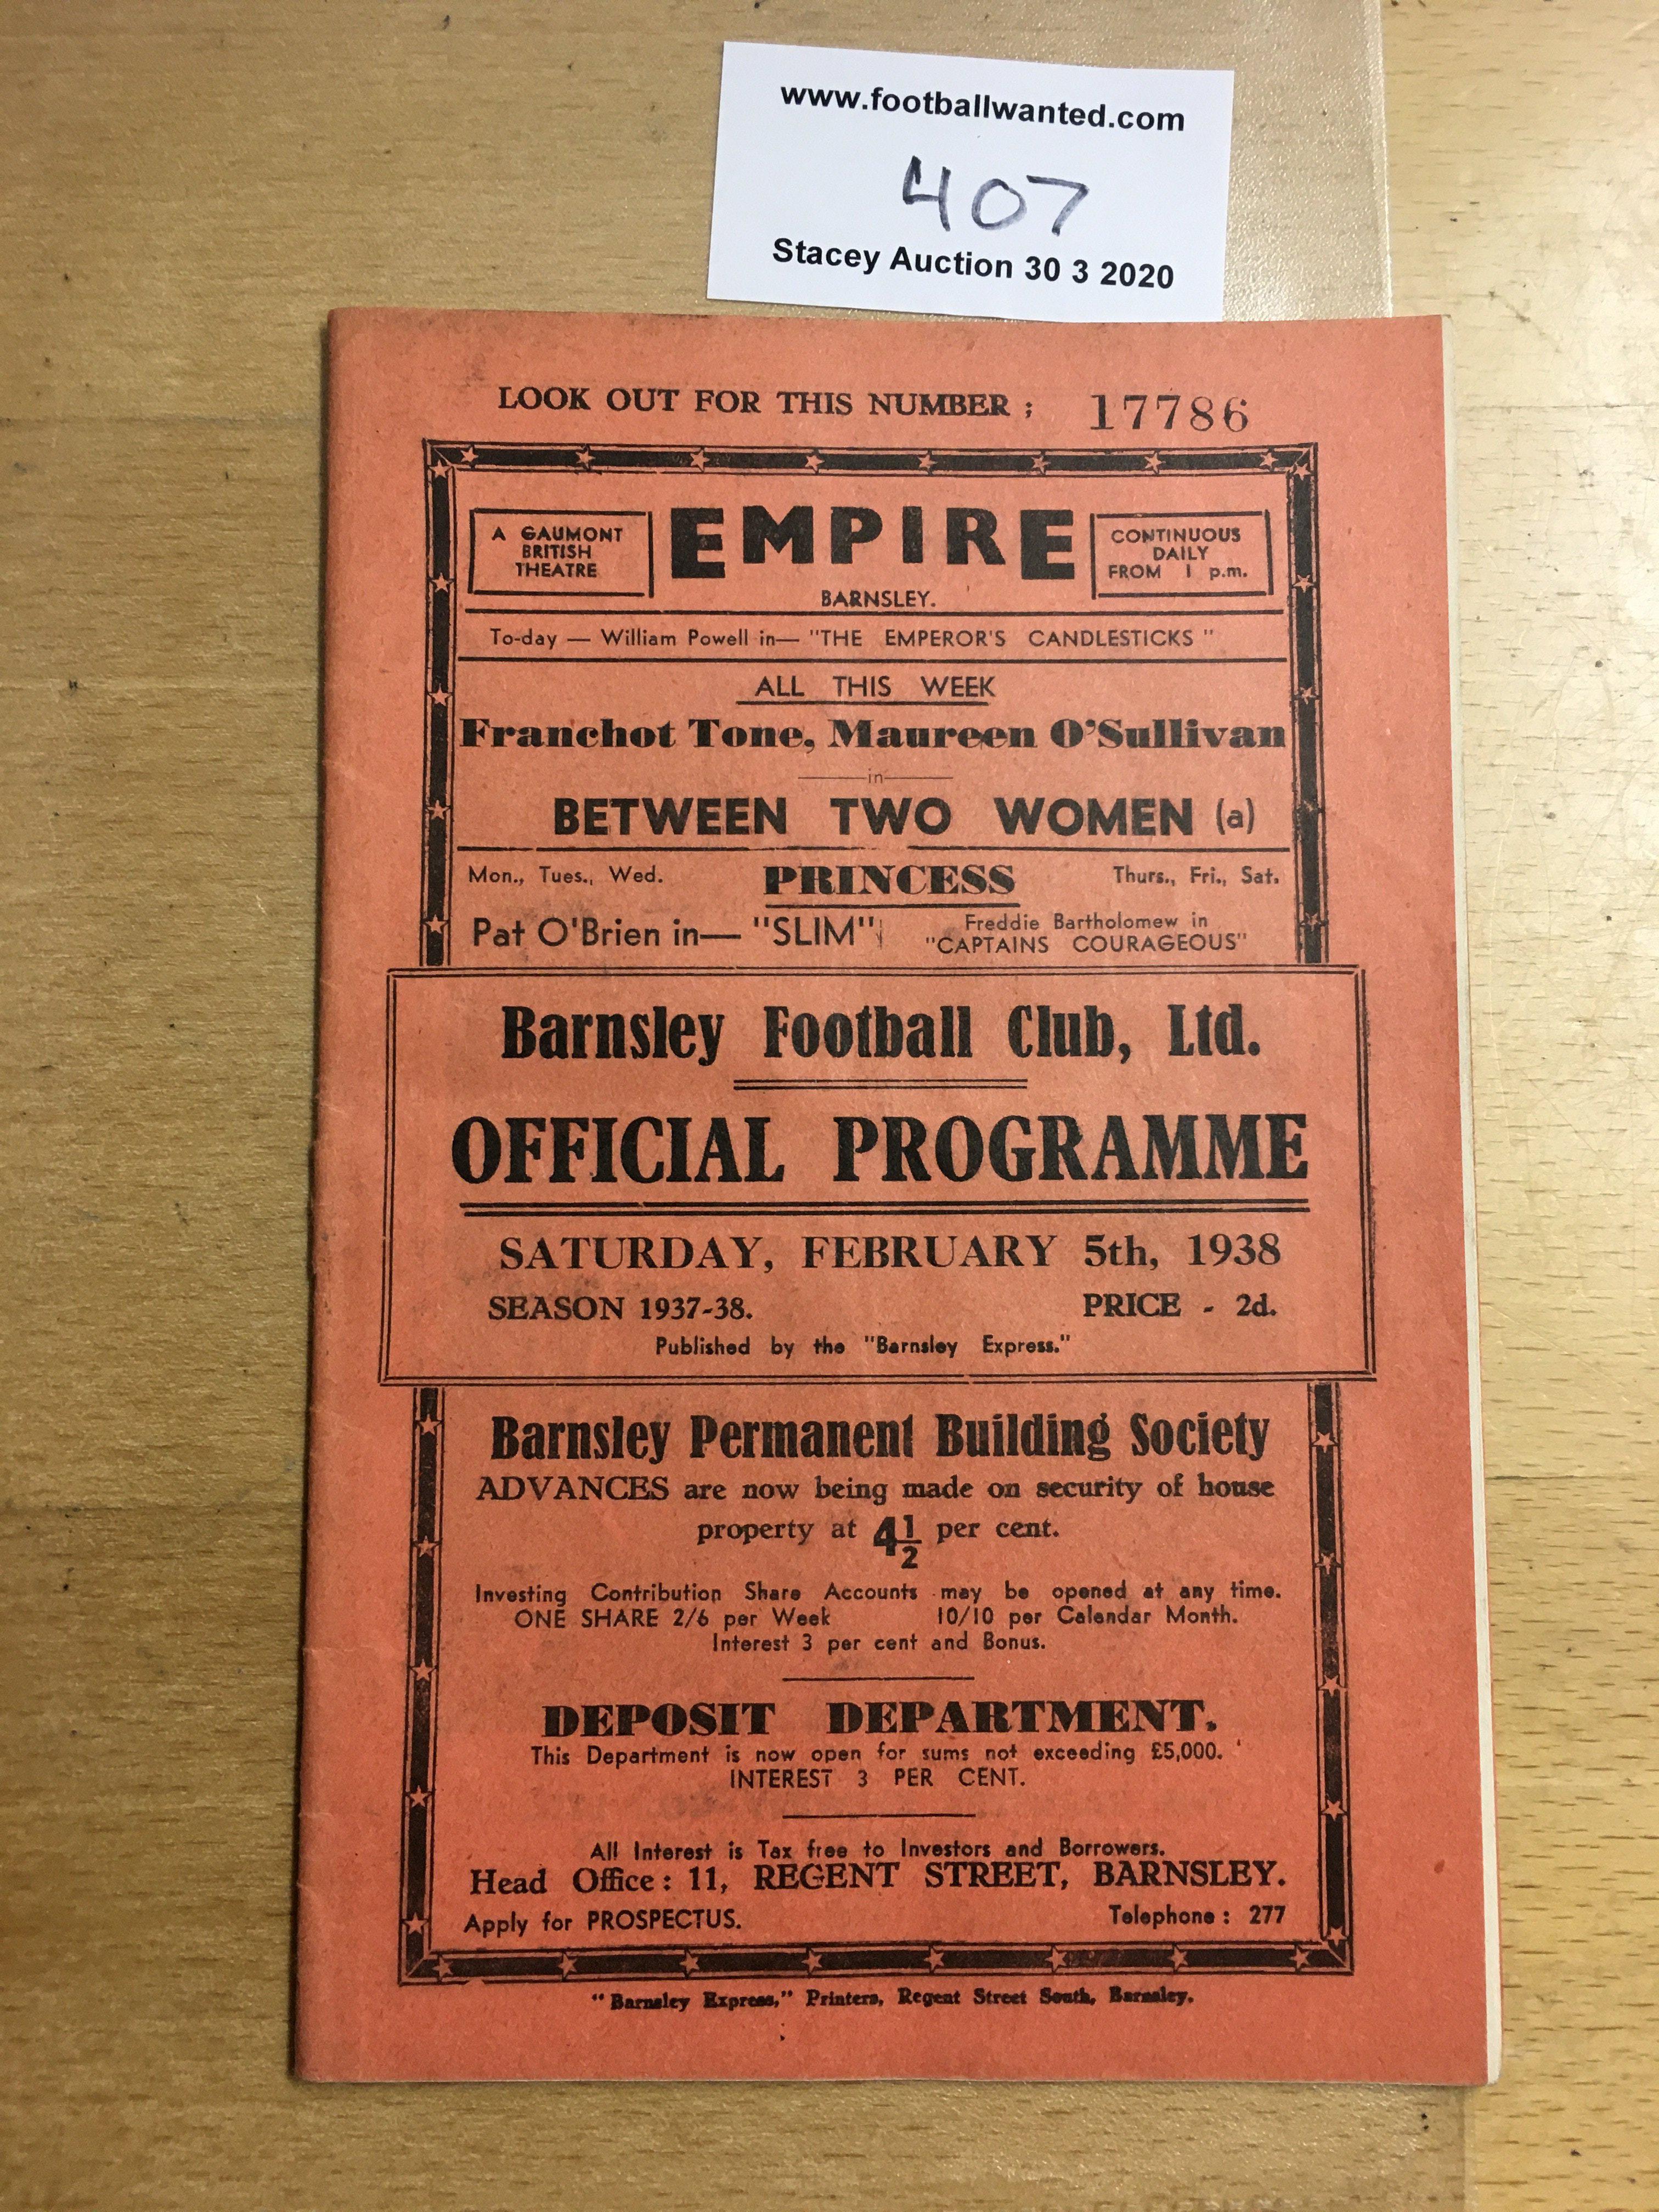 37/38 Barnsley v Tottenham Football Programme: Dated 5 2 1938. No team changes. Excellent condition.